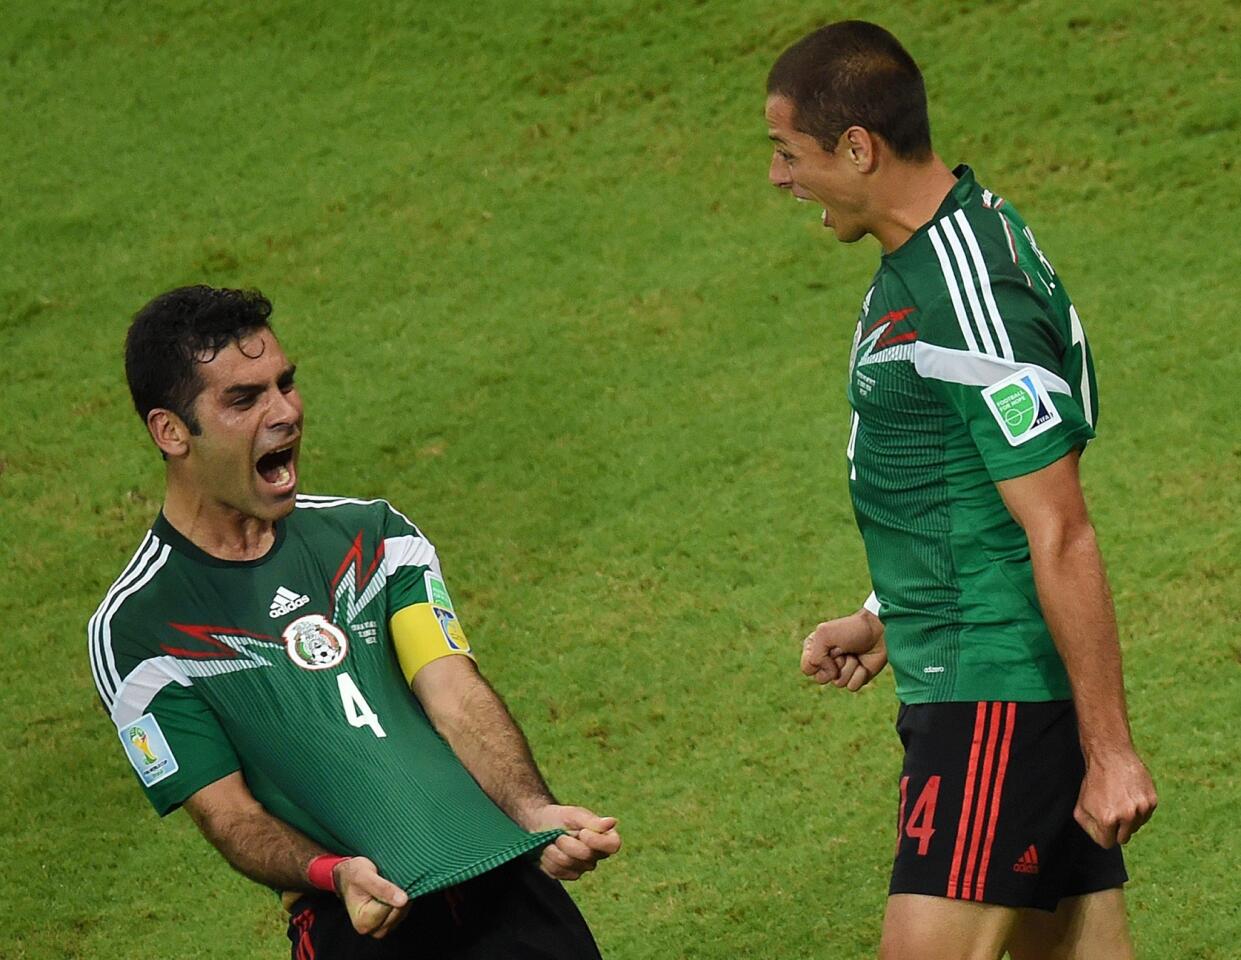 Mexico's defender Rafael Marquez celebrates after scoring his team's first goal as Javier Hernandez reacts.